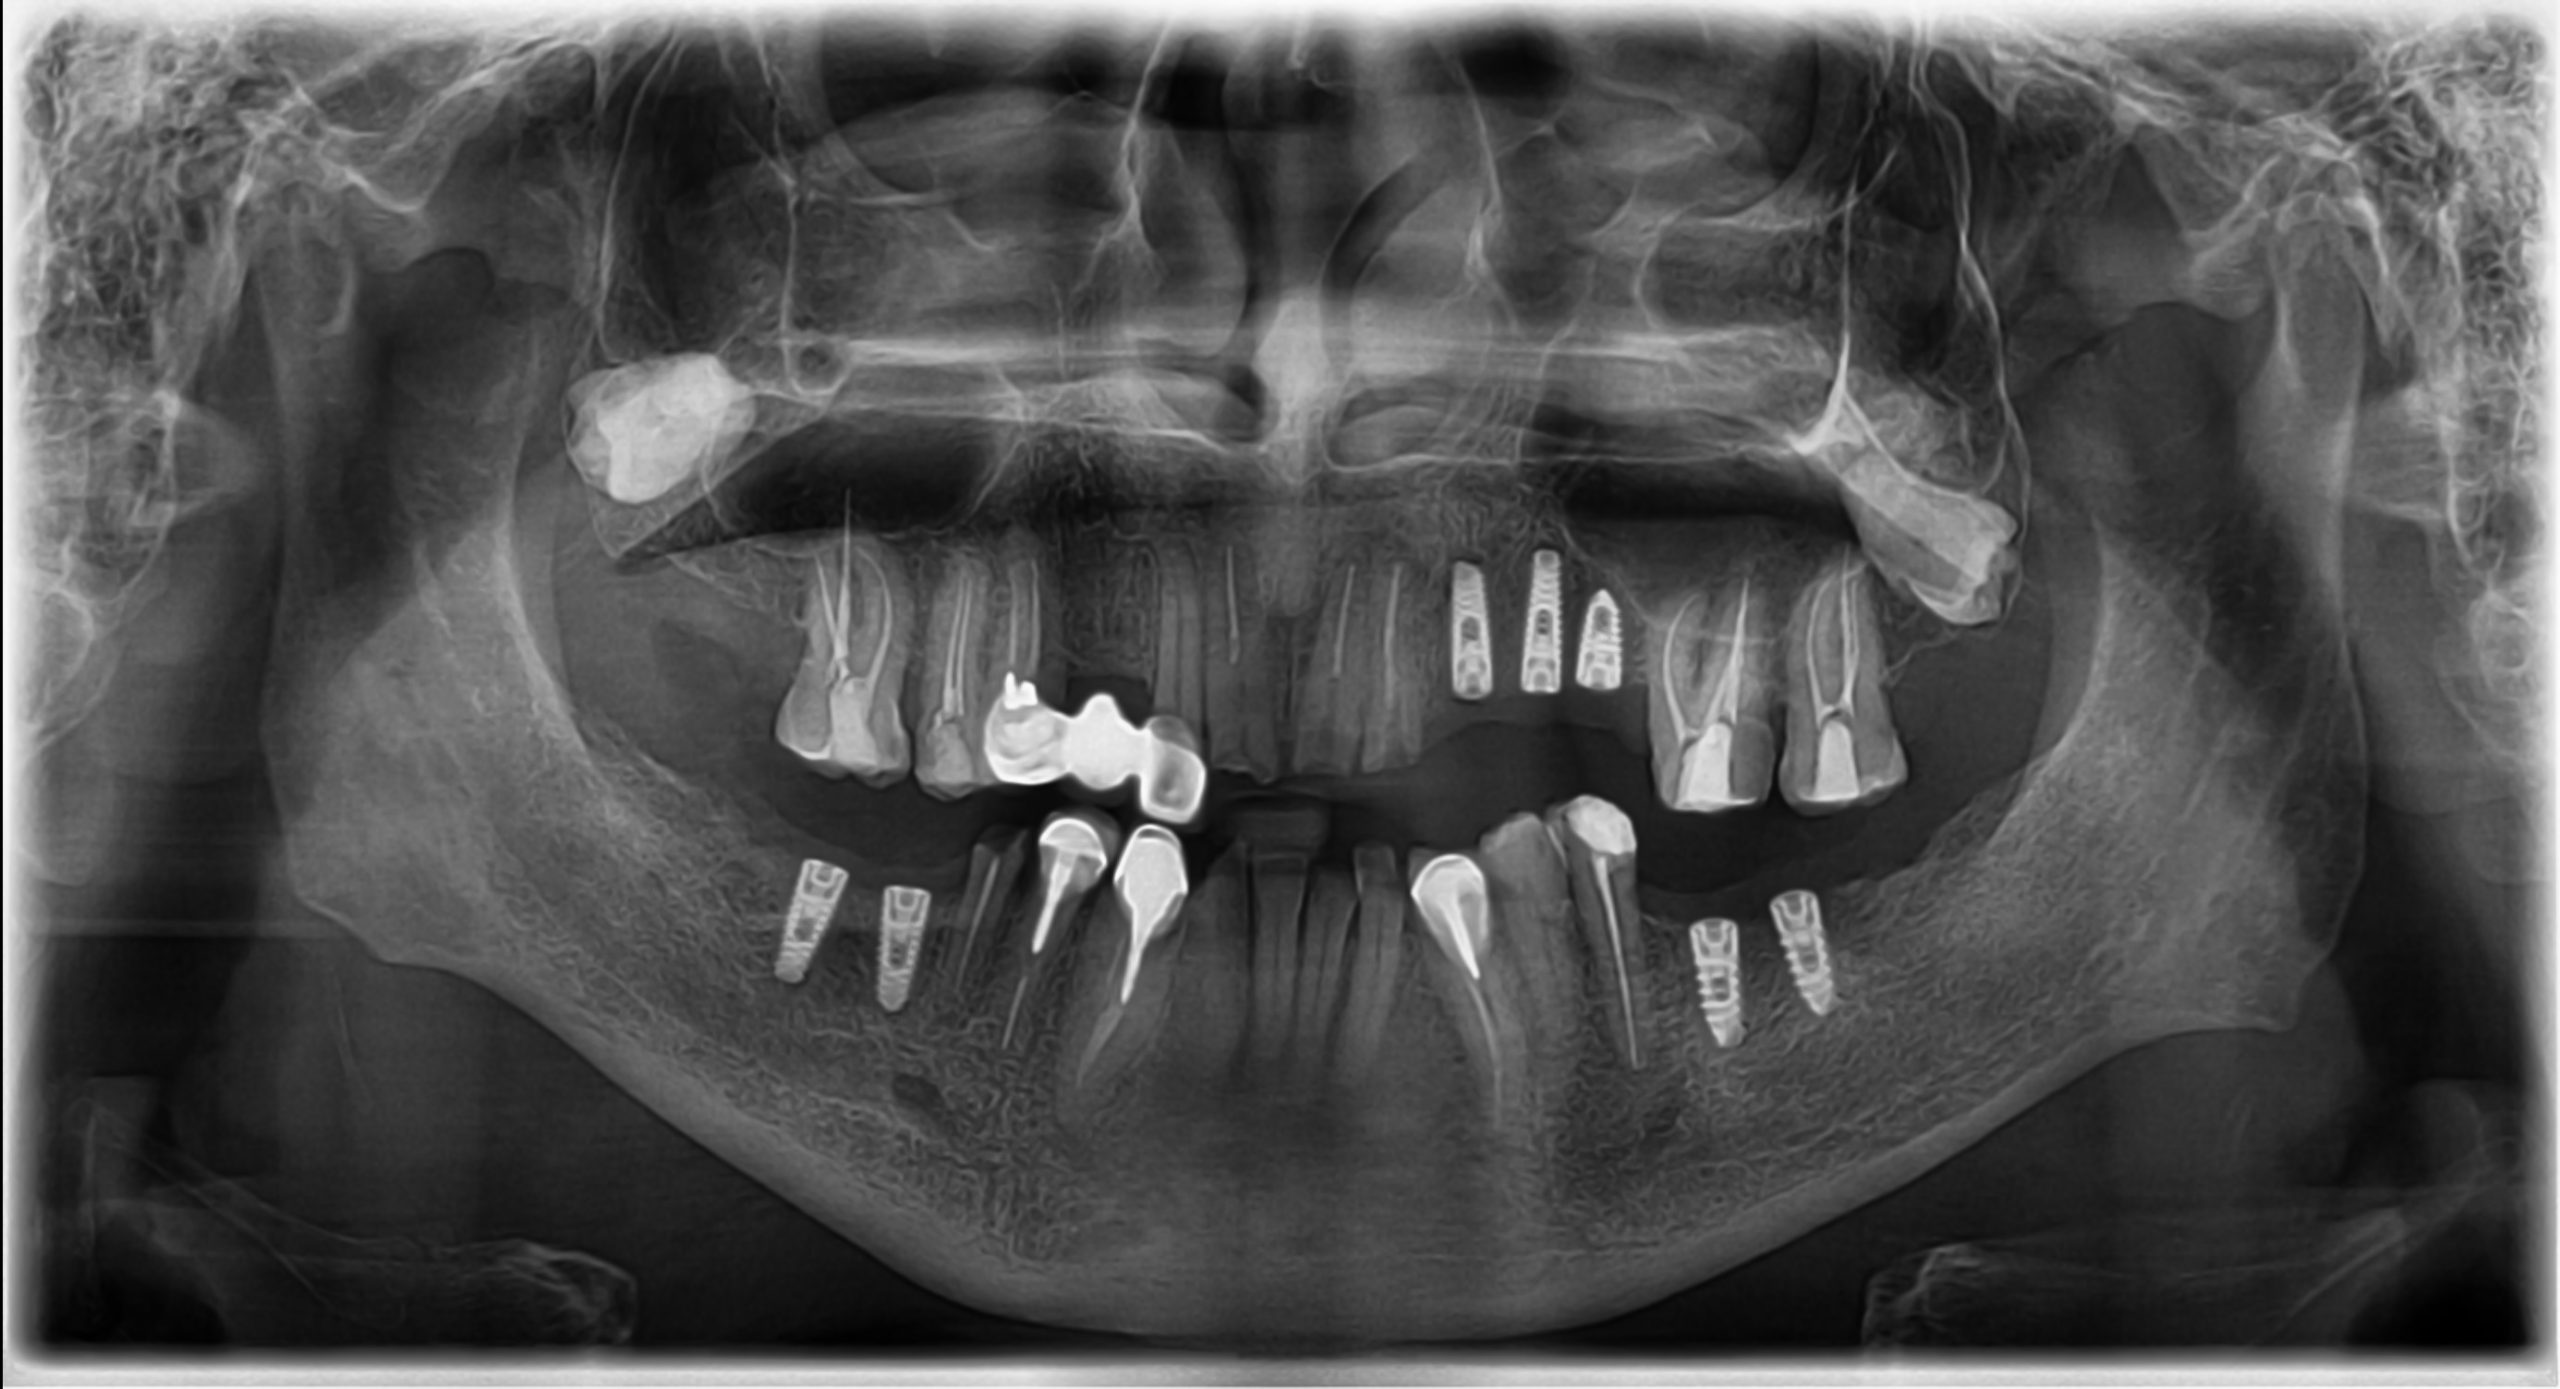 http://dentalexcellence.co.in/wp-content/uploads/2023/02/Pt-3-Post-Implant-Placement-1-scaled.jpg